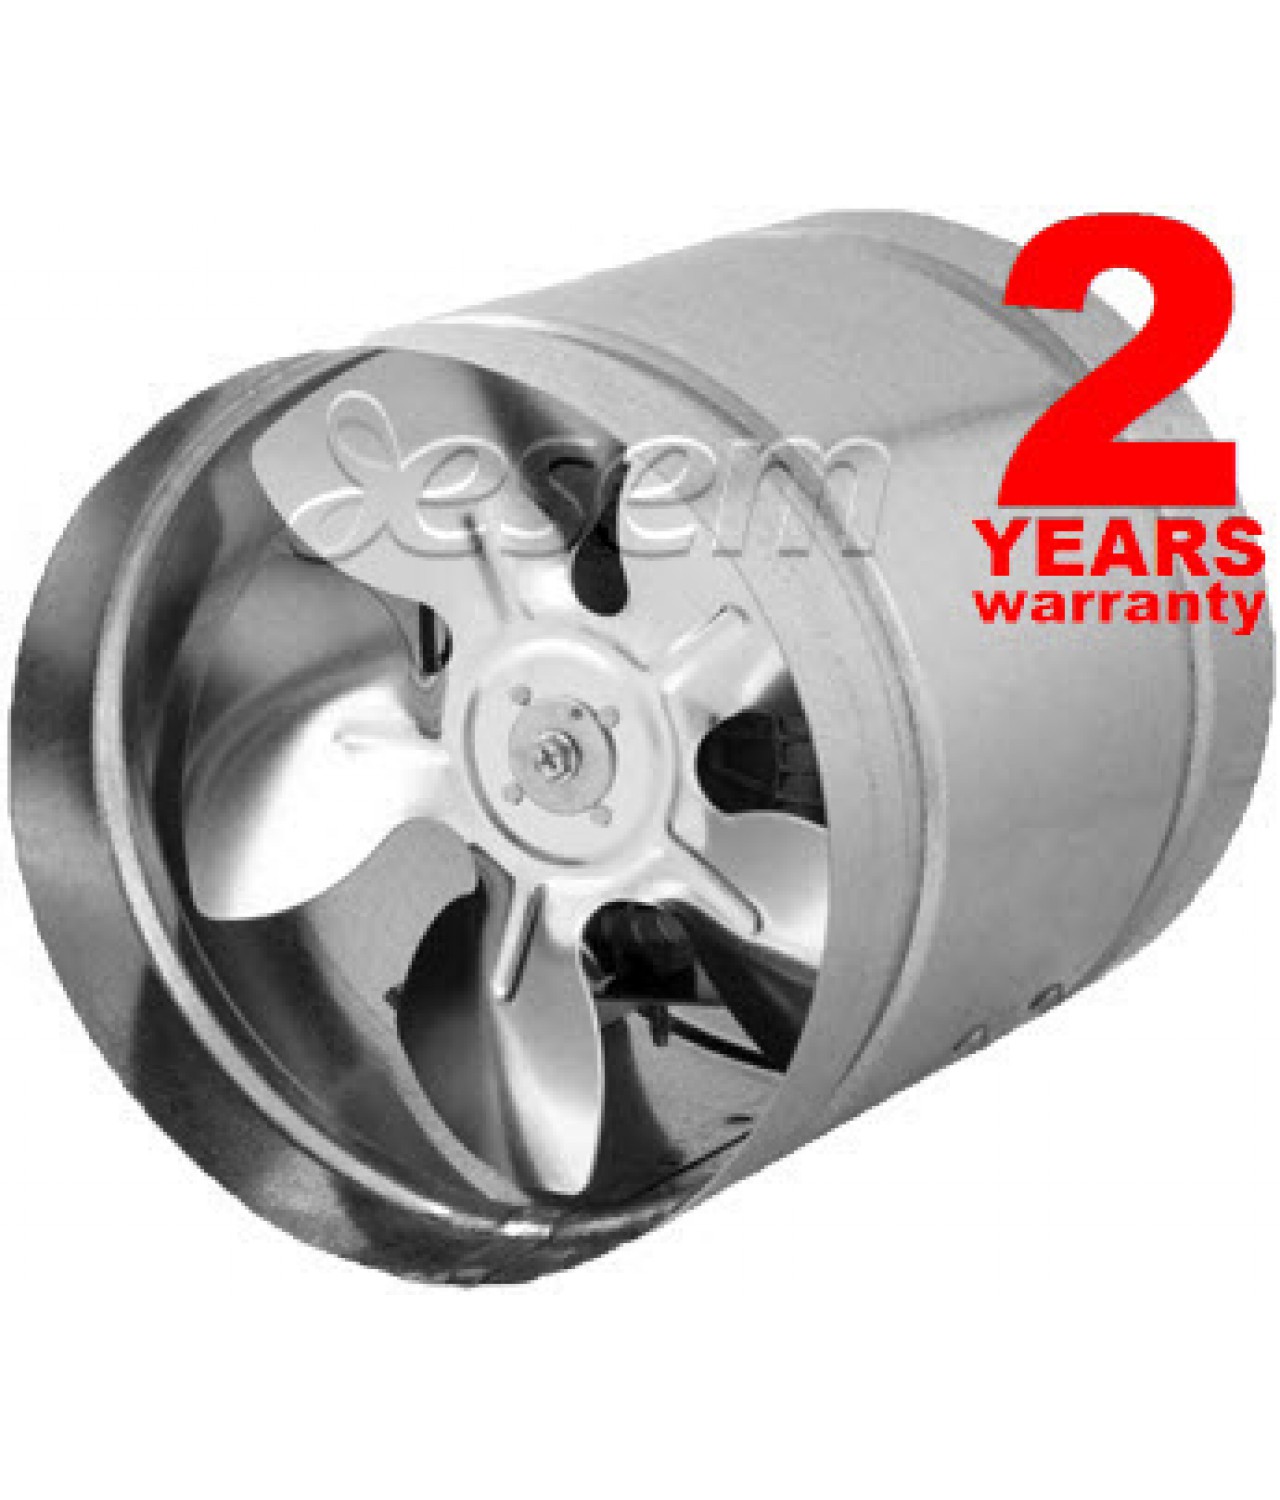 Axial duct fans WK ≤915 m³/h